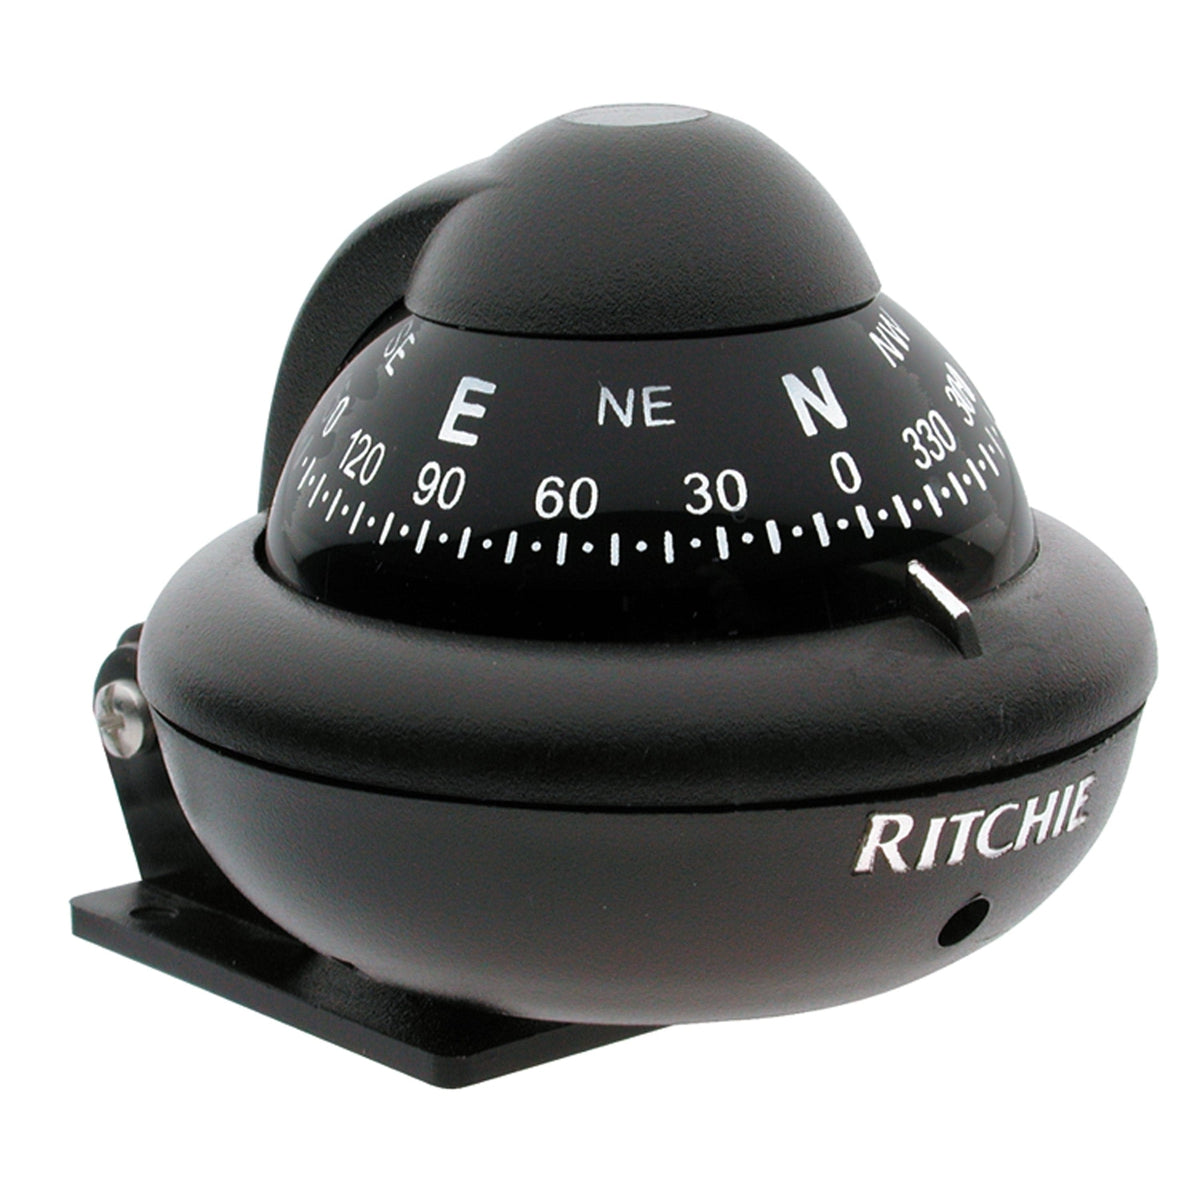 Ritchie Compass Qualifies for Free Shipping Ritchie Compass RitchieSport Compass Marine/Automotive Black #X-10B-M-1